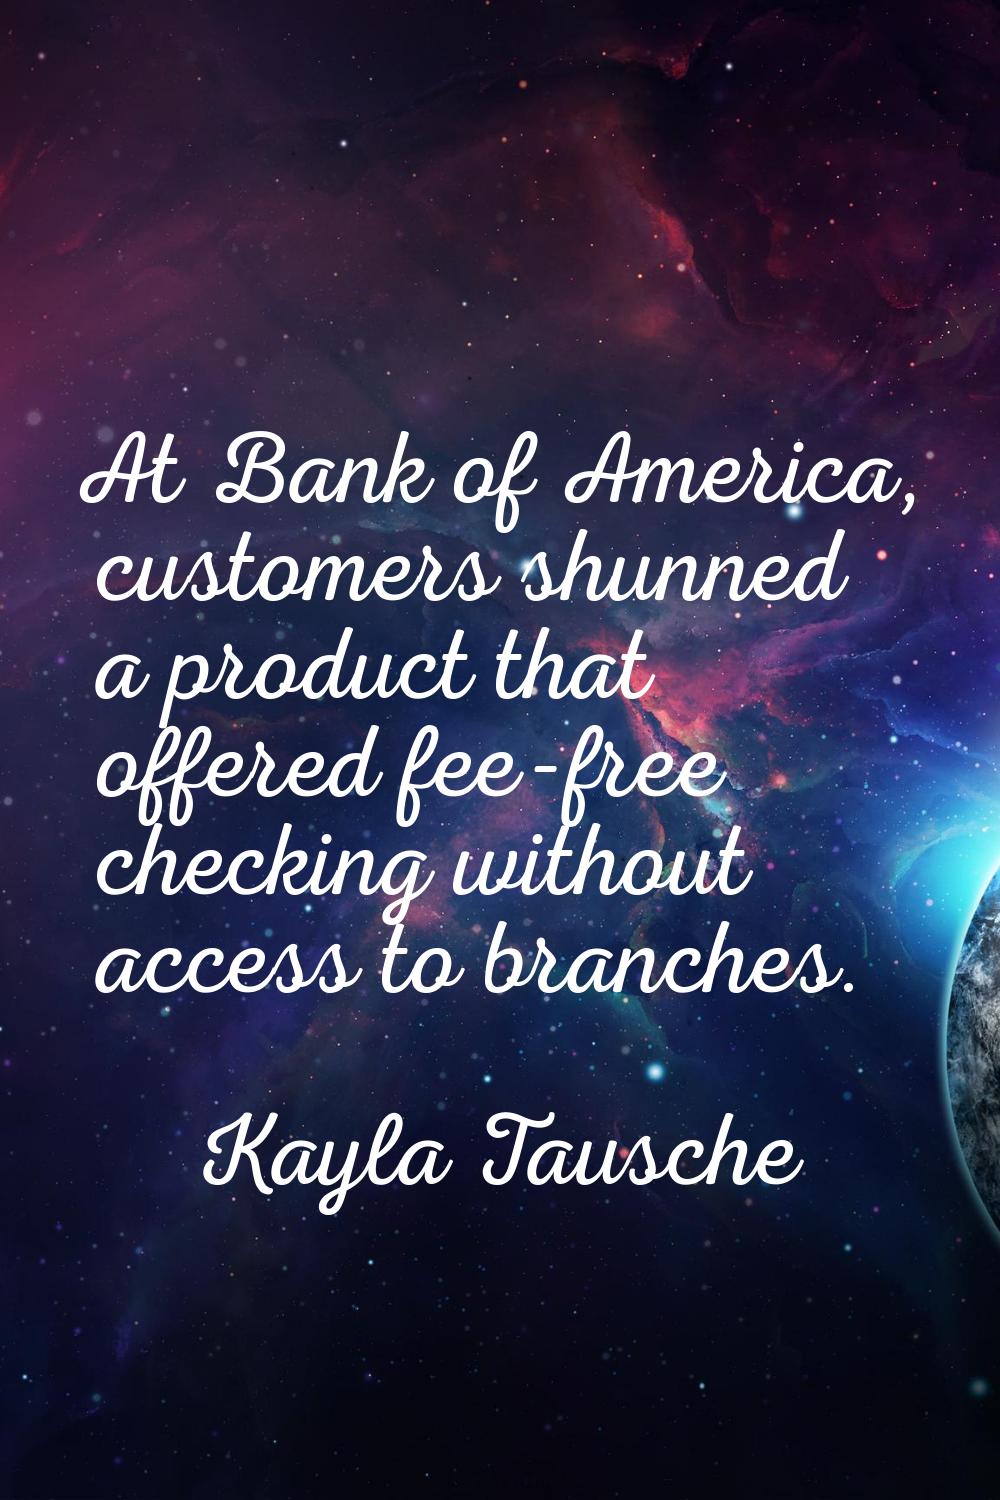 At Bank of America, customers shunned a product that offered fee-free checking without access to br